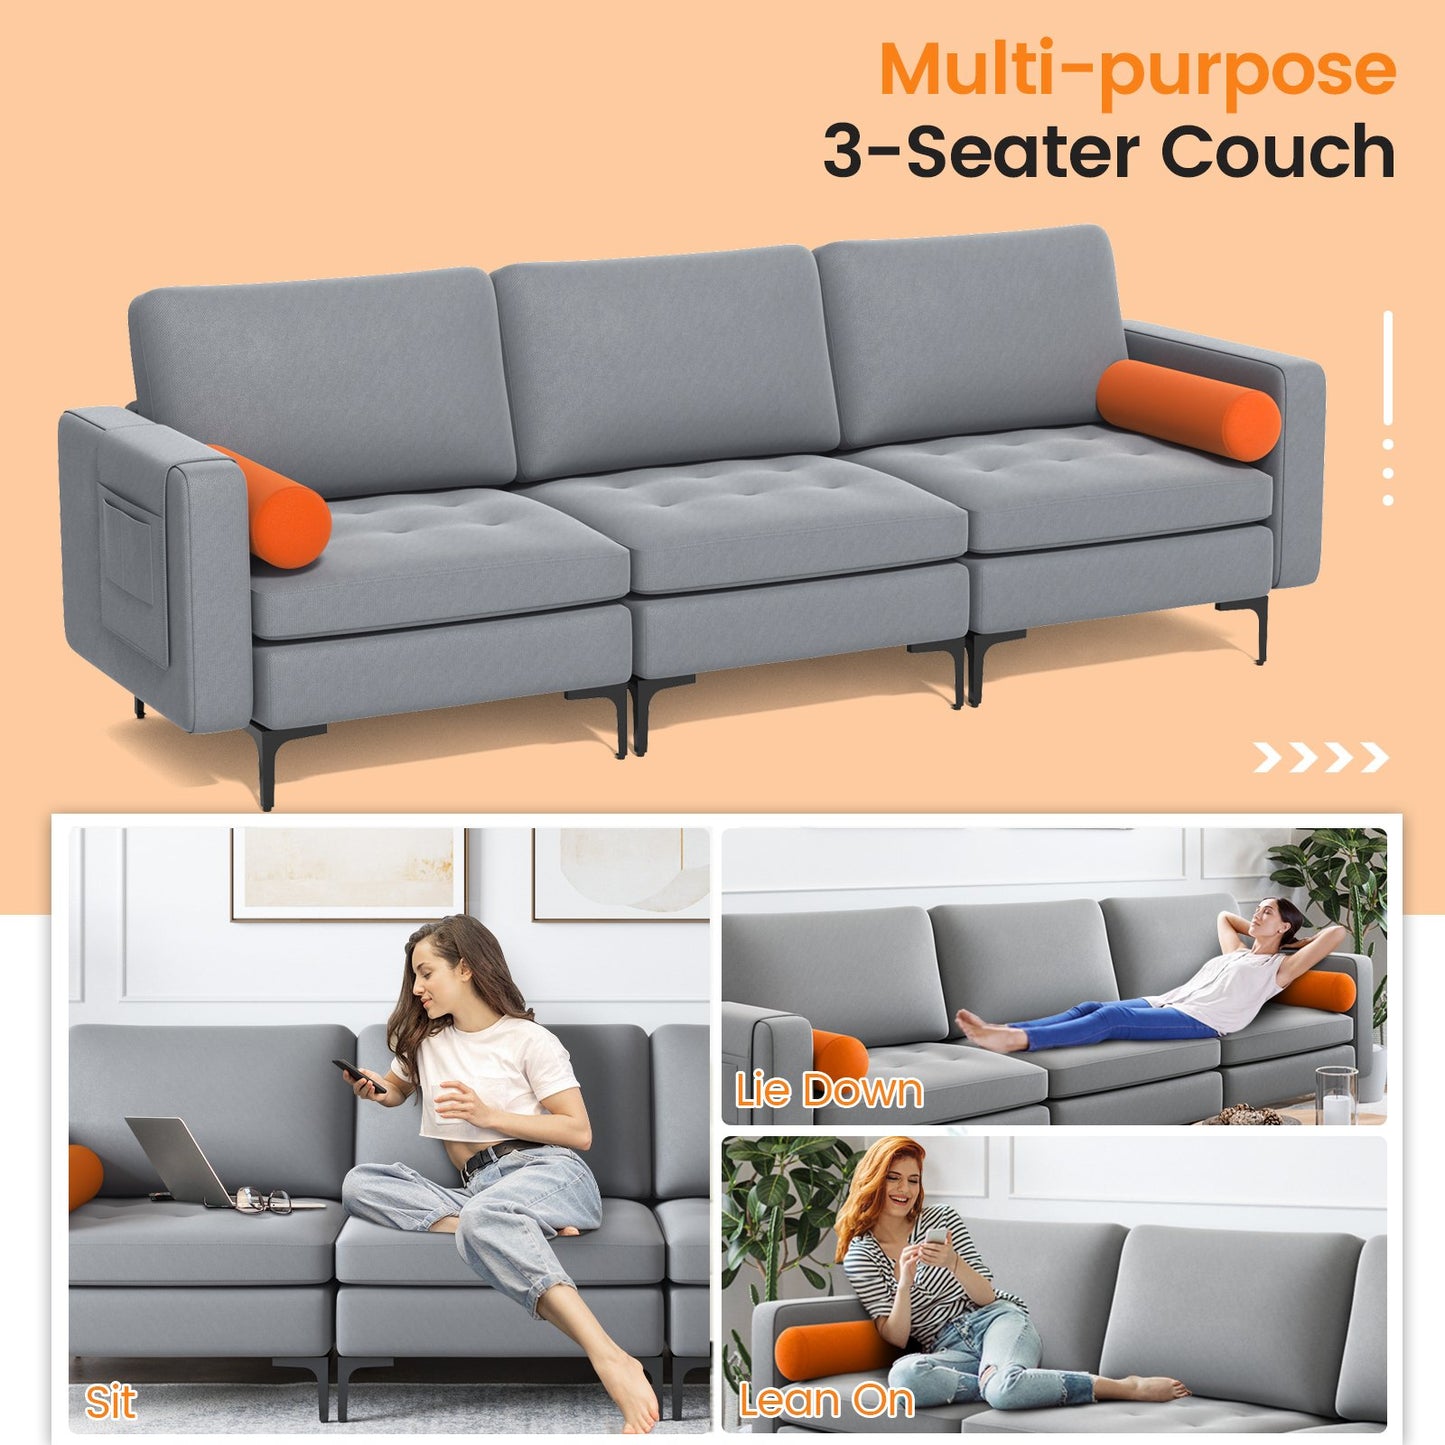 Modular 3-Seat Sofa Couch with Socket USB Ports and Side Storage Pocket, Gray